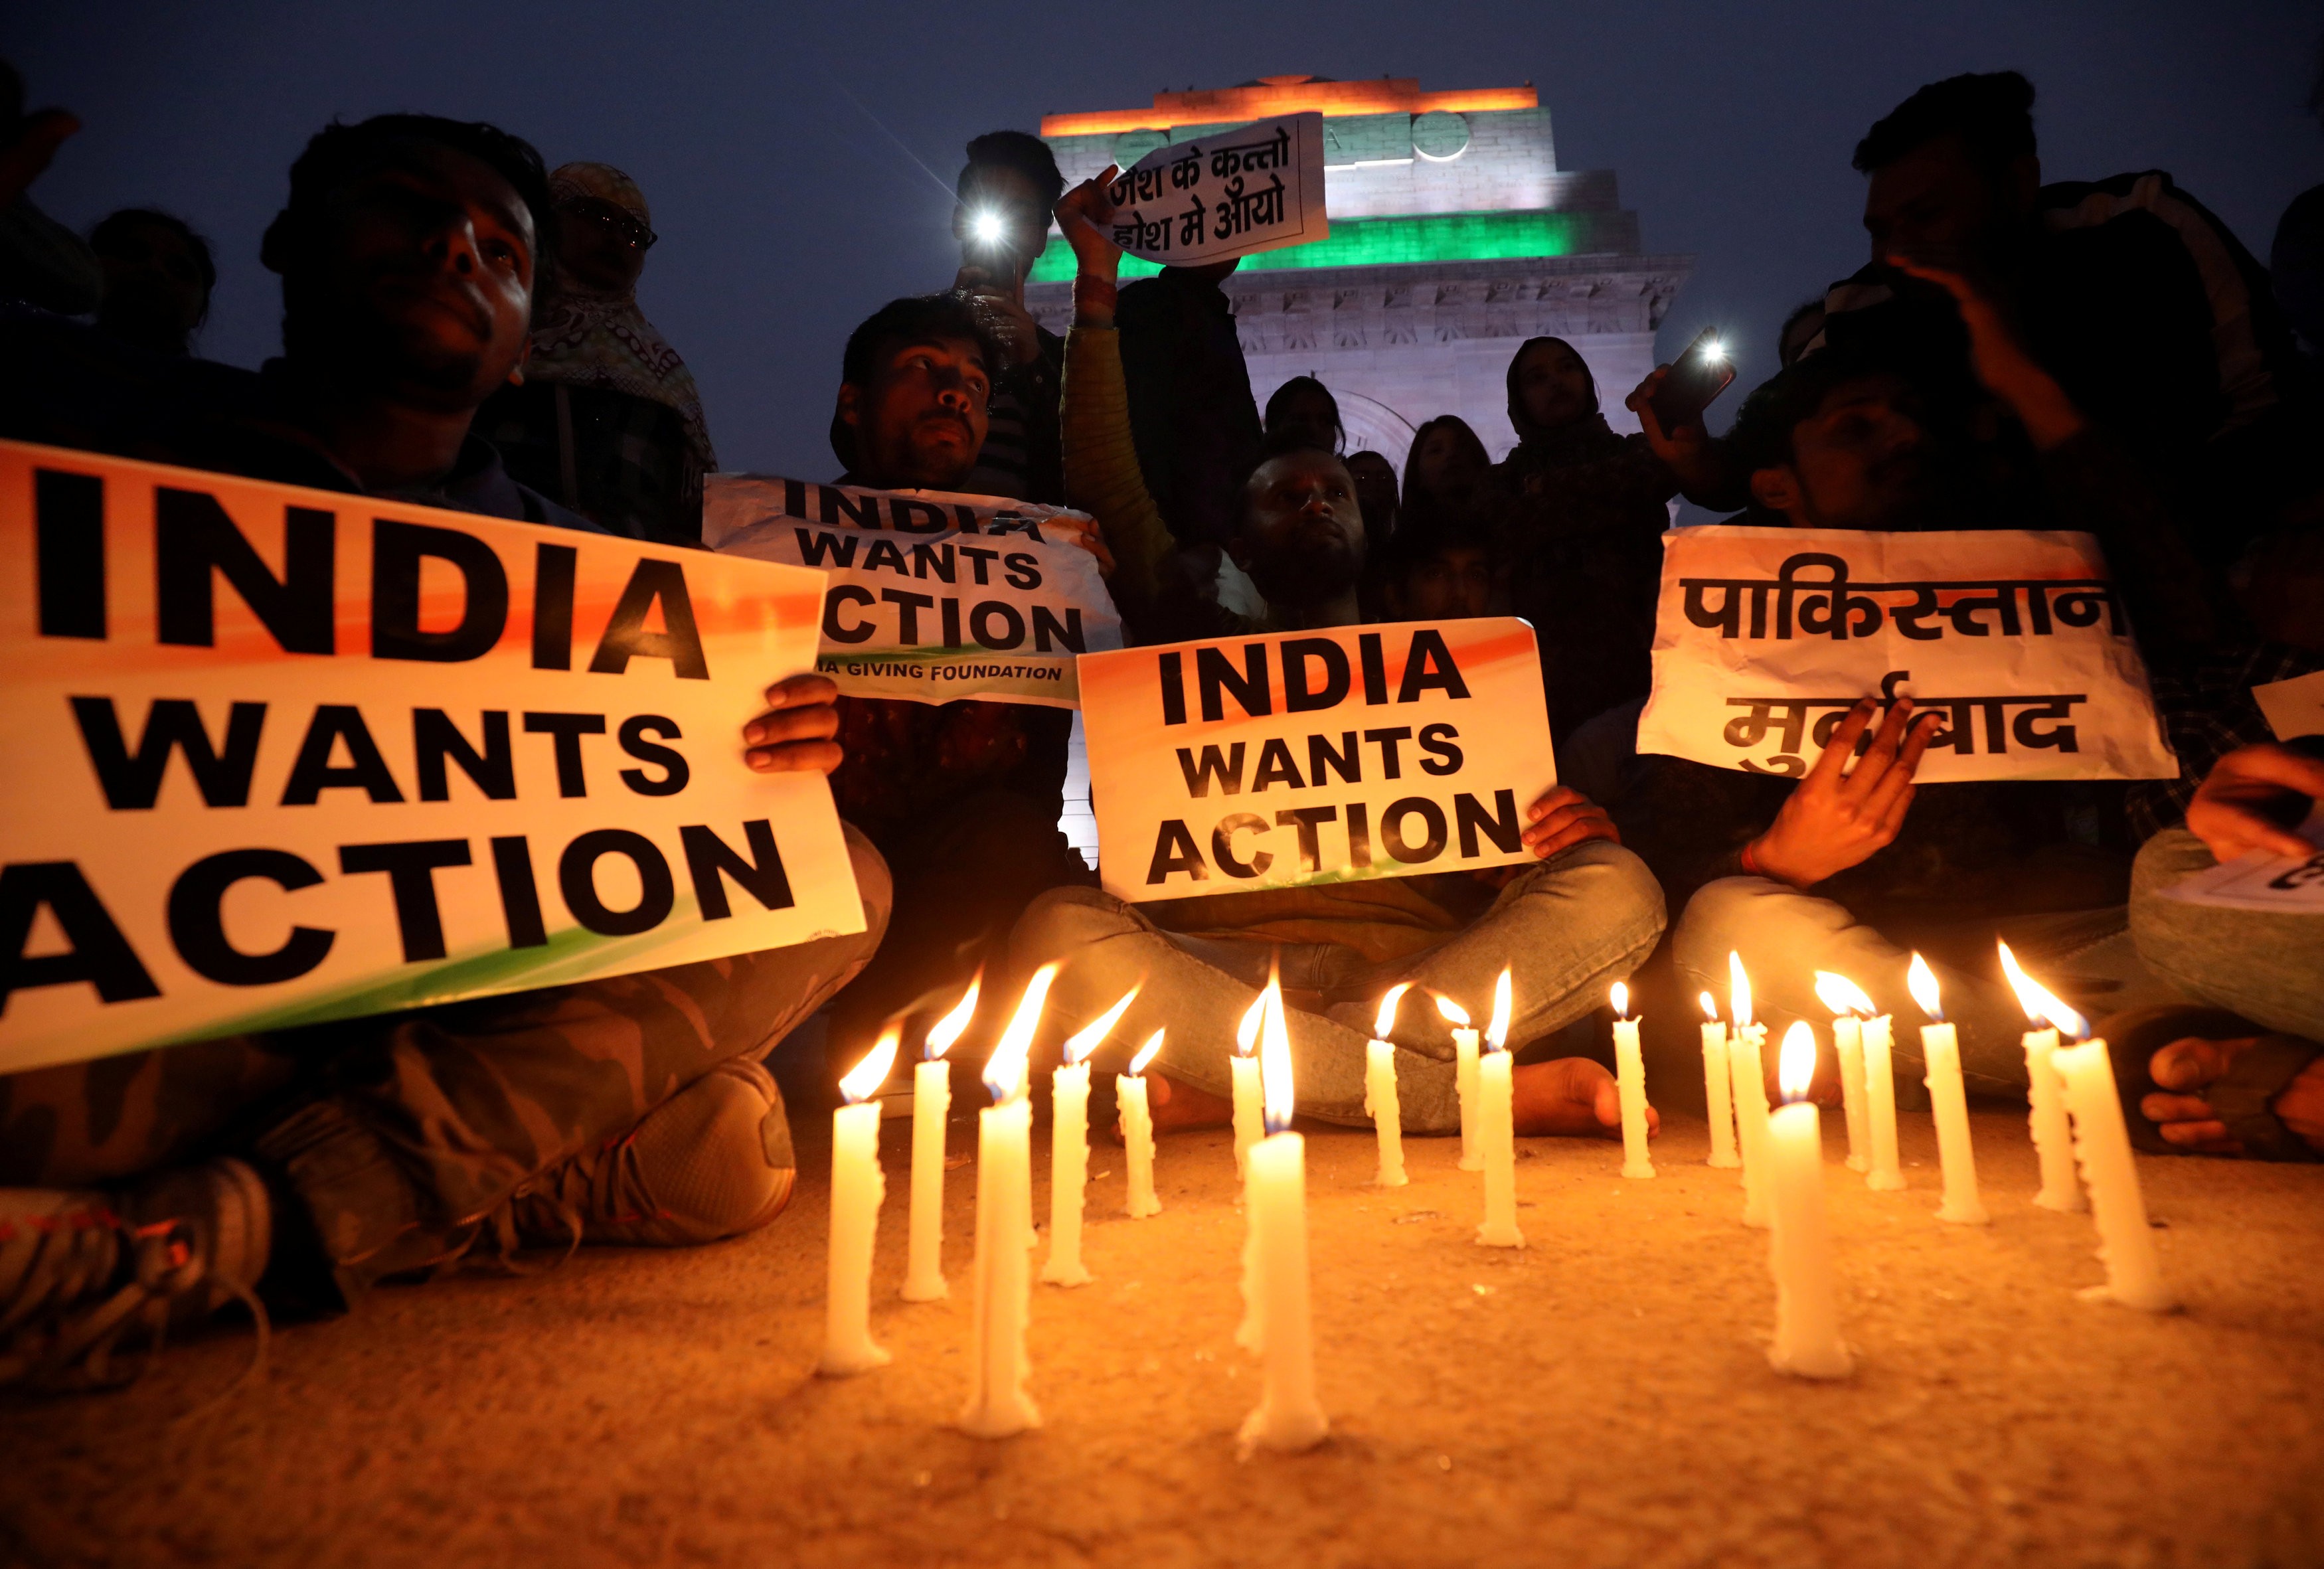 Demonstrators demand action at a candle light vigil held in India in the wake of the suicide bombing. Photo: Reuters